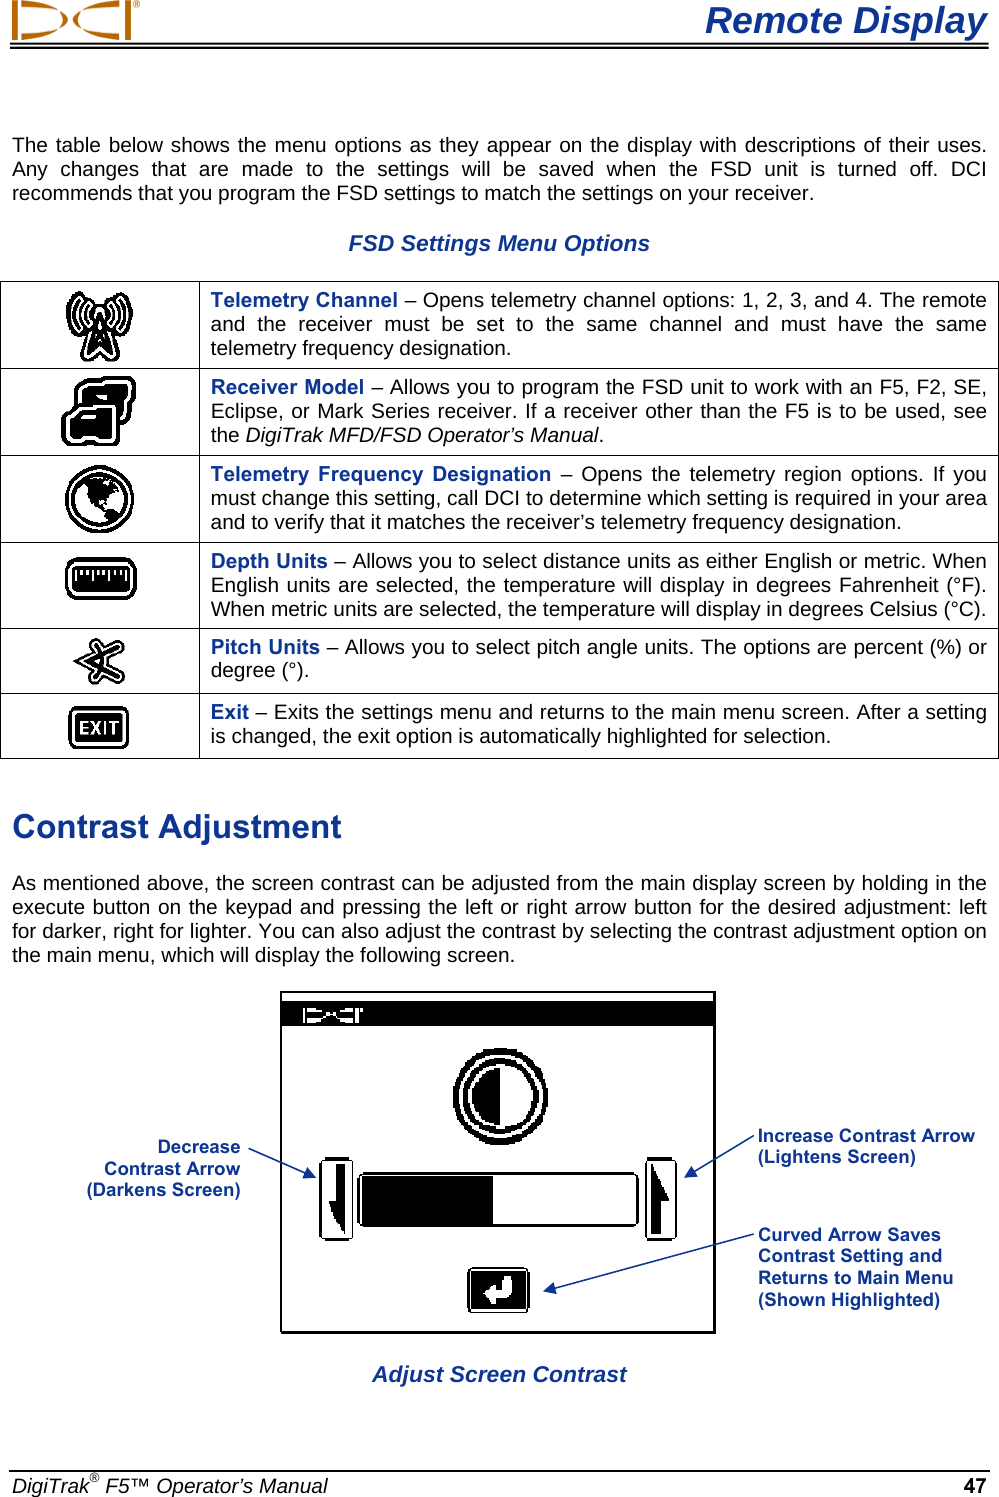  Remote Display DigiTrak® F5™ Operator’s Manual 47 The table below shows the menu options as they appear on the display with descriptions of their uses. Any changes that are made to the settings will be saved when the FSD unit is turned off. DCI recommends that you program the FSD settings to match the settings on your receiver. FSD Settings Menu Options  Telemetry Channel – Opens telemetry channel options: 1, 2, 3, and 4. The remote and the receiver must be set to the same channel and must have the same telemetry frequency designation.  Receiver Model – Allows you to program the FSD unit to work with an F5, F2, SE, Eclipse, or Mark Series receiver. If a receiver other than the F5 is to be used, see the DigiTrak MFD/FSD Operator’s Manual.   Telemetry Frequency Designation – Opens the telemetry region options. If you must change this setting, call DCI to determine which setting is required in your area and to verify that it matches the receiver’s telemetry frequency designation.  Depth Units – Allows you to select distance units as either English or metric. When English units are selected, the temperature will display in degrees Fahrenheit (°F). When metric units are selected, the temperature will display in degrees Celsius (°C).  Pitch Units – Allows you to select pitch angle units. The options are percent (%) or degree (°).  Exit – Exits the settings menu and returns to the main menu screen. After a setting is changed, the exit option is automatically highlighted for selection.  Contrast Adjustment As mentioned above, the screen contrast can be adjusted from the main display screen by holding in the execute button on the keypad and pressing the left or right arrow button for the desired adjustment: left for darker, right for lighter. You can also adjust the contrast by selecting the contrast adjustment option on the main menu, which will display the following screen.  Adjust Screen Contrast Decrease  Contrast Arrow (Darkens Screen) Increase Contrast Arrow (Lightens Screen) Curved Arrow Saves Contrast Setting and Returns to Main Menu (Shown Highlighted) 